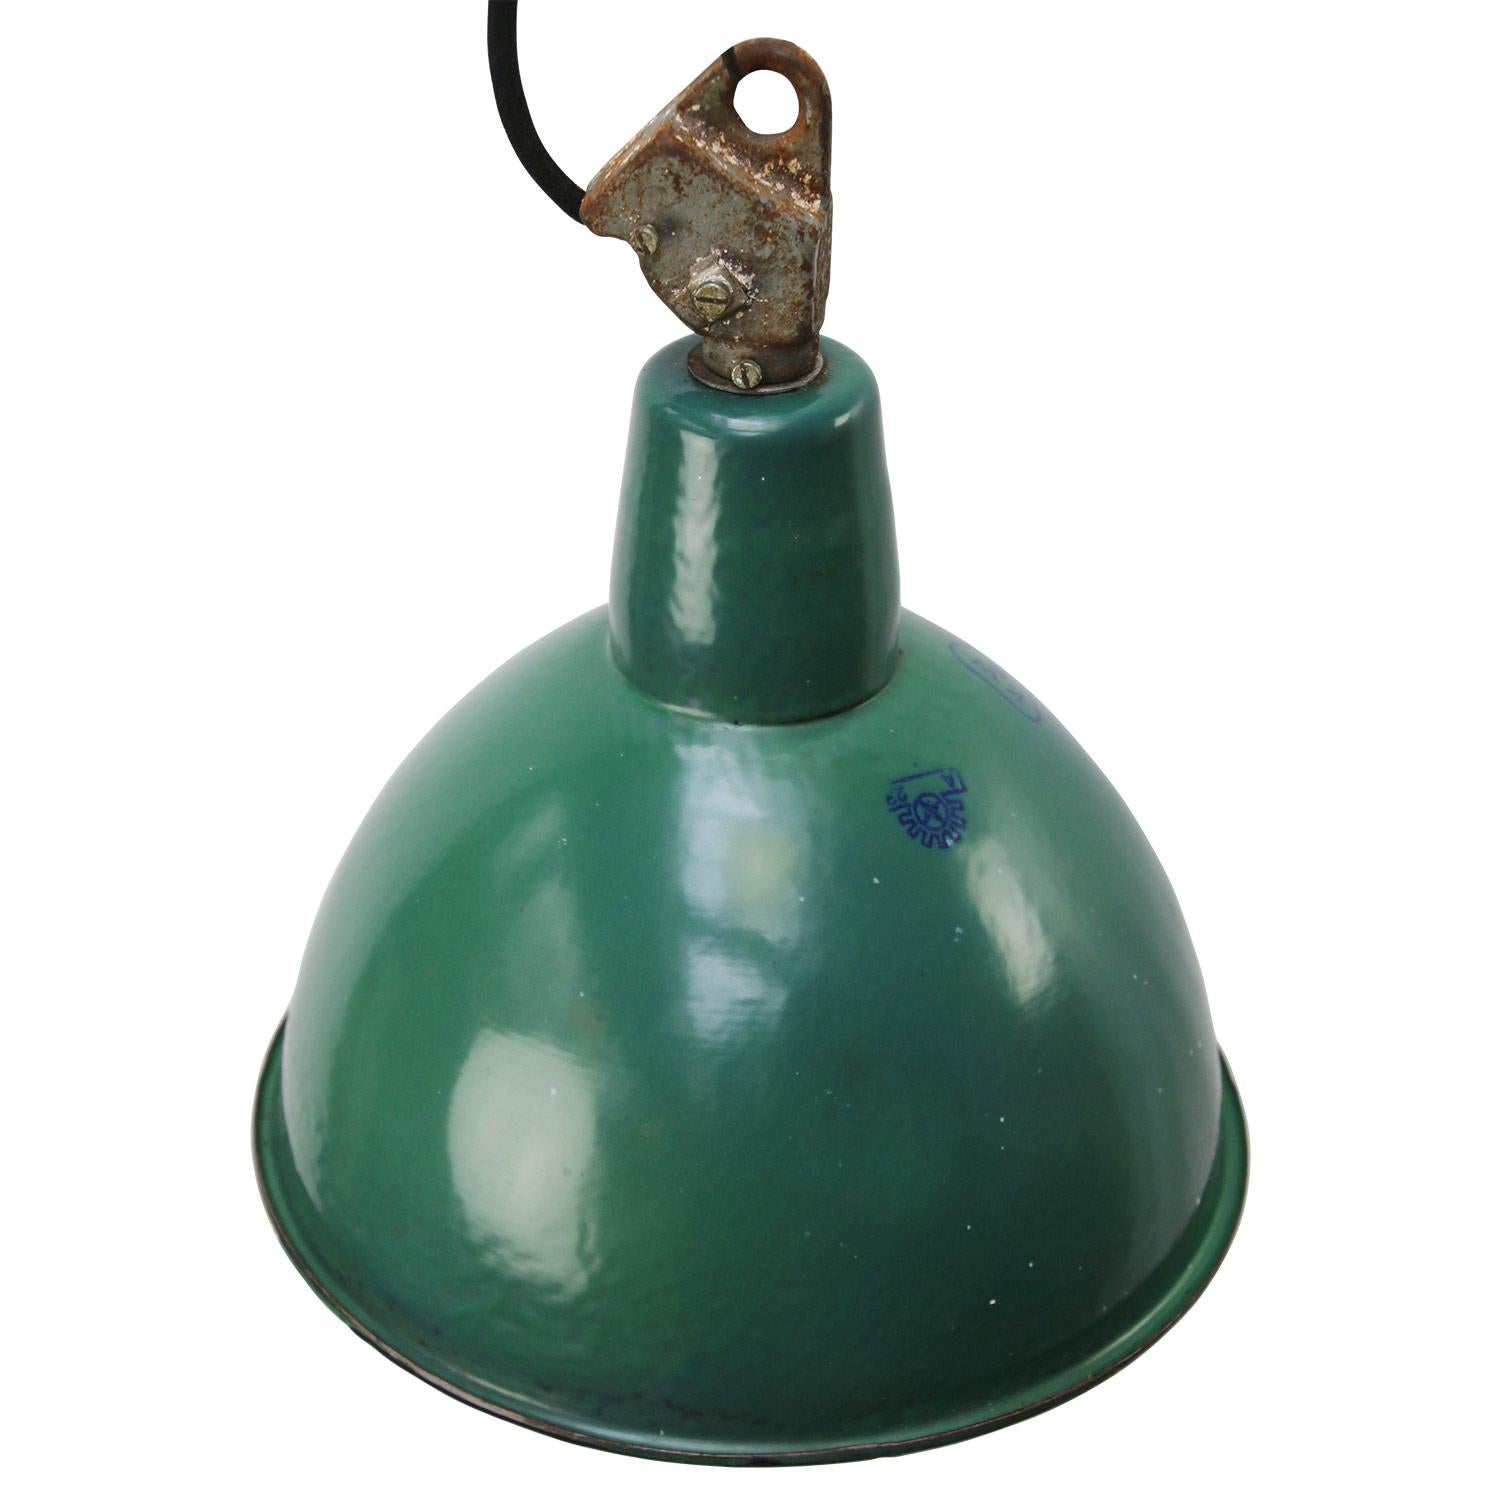 Industrial hanging light. Petrol green enamel white interior.

Weight: 2.0 kg / 4.4 lb

Priced per individual item. All lamps have been made suitable by international standards for incandescent light bulbs, energy-efficient and LED bulbs.